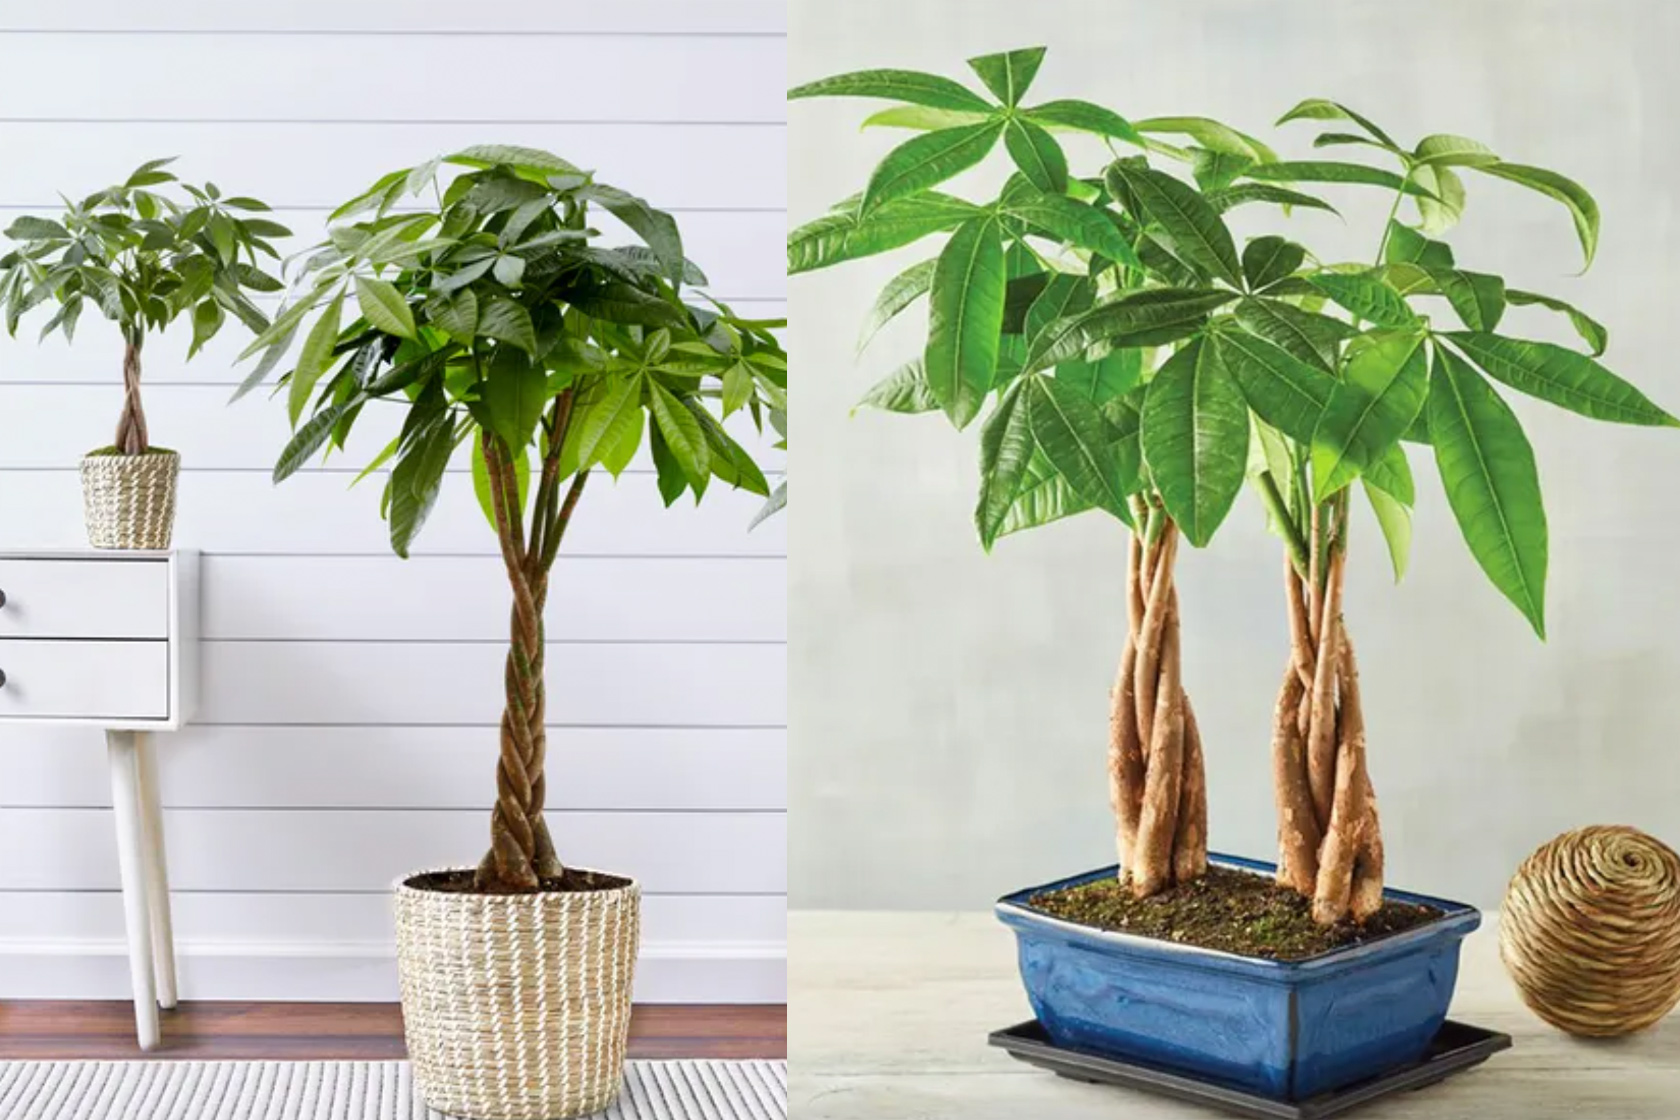 How to take care a money tree plant